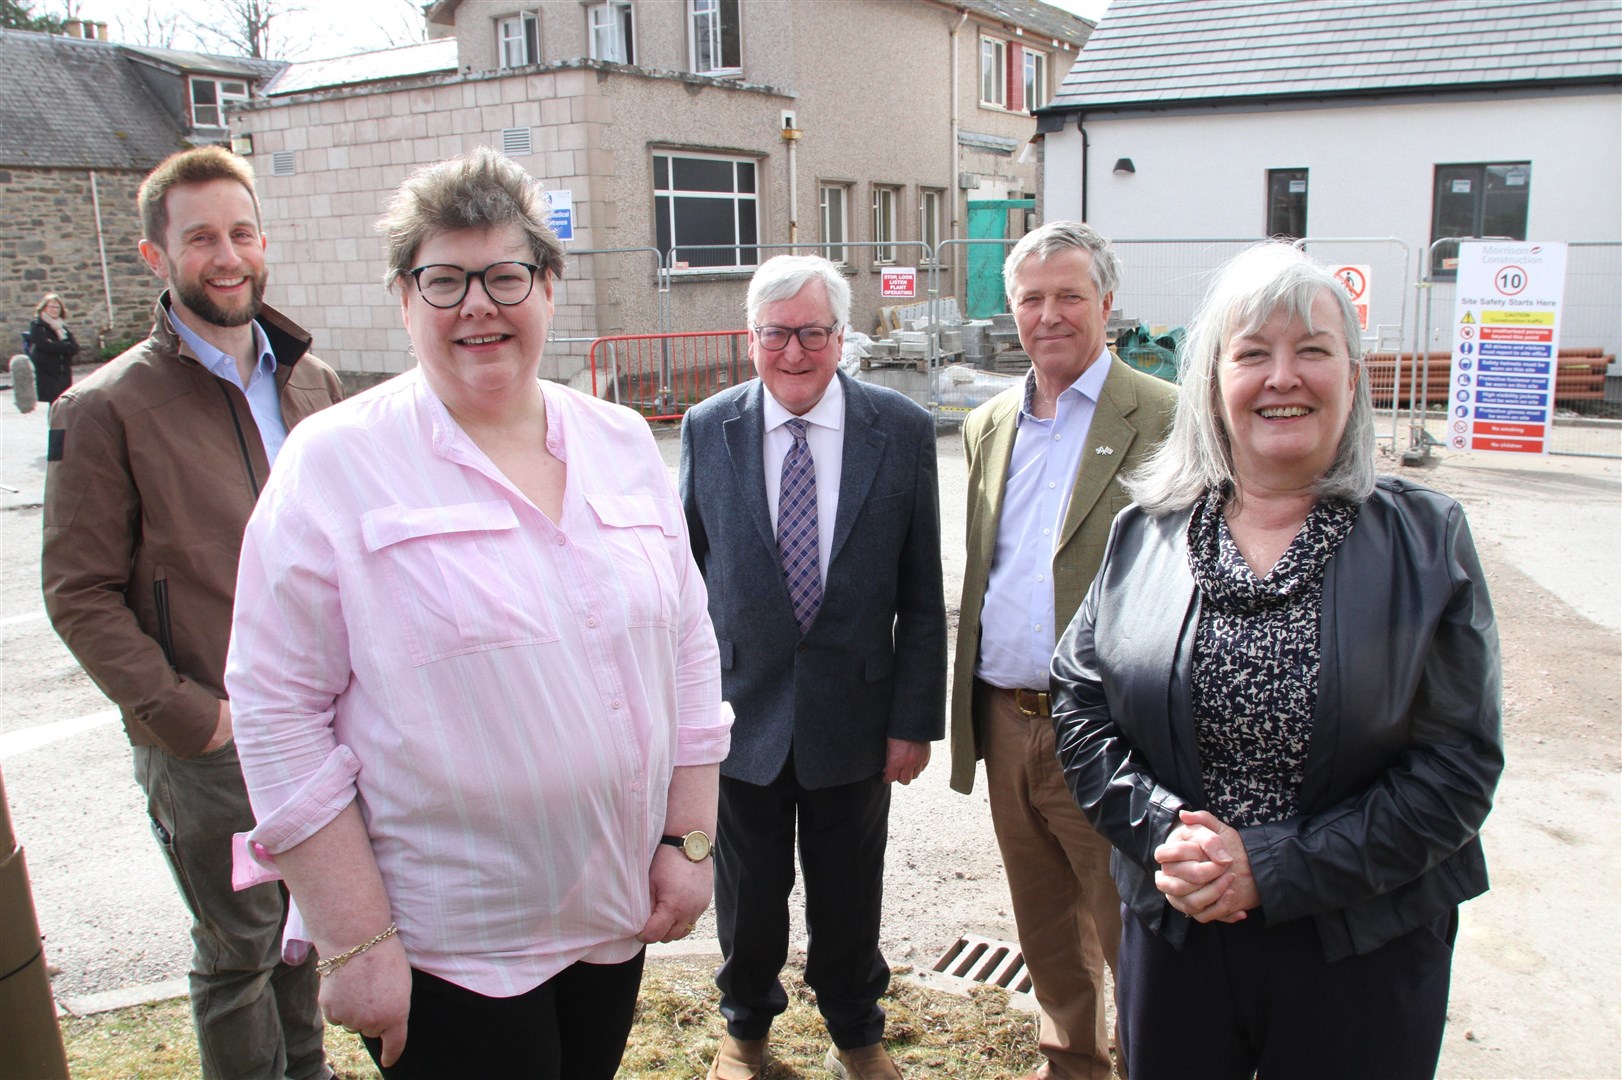 A cause for celebration... Dr Al Miles, practice executive manager Kathy Cockburn, Fergus Ewing MSP, Edward Mountain MSP and Rhoda Grant MSP at yesterday's announcement of the funding success.